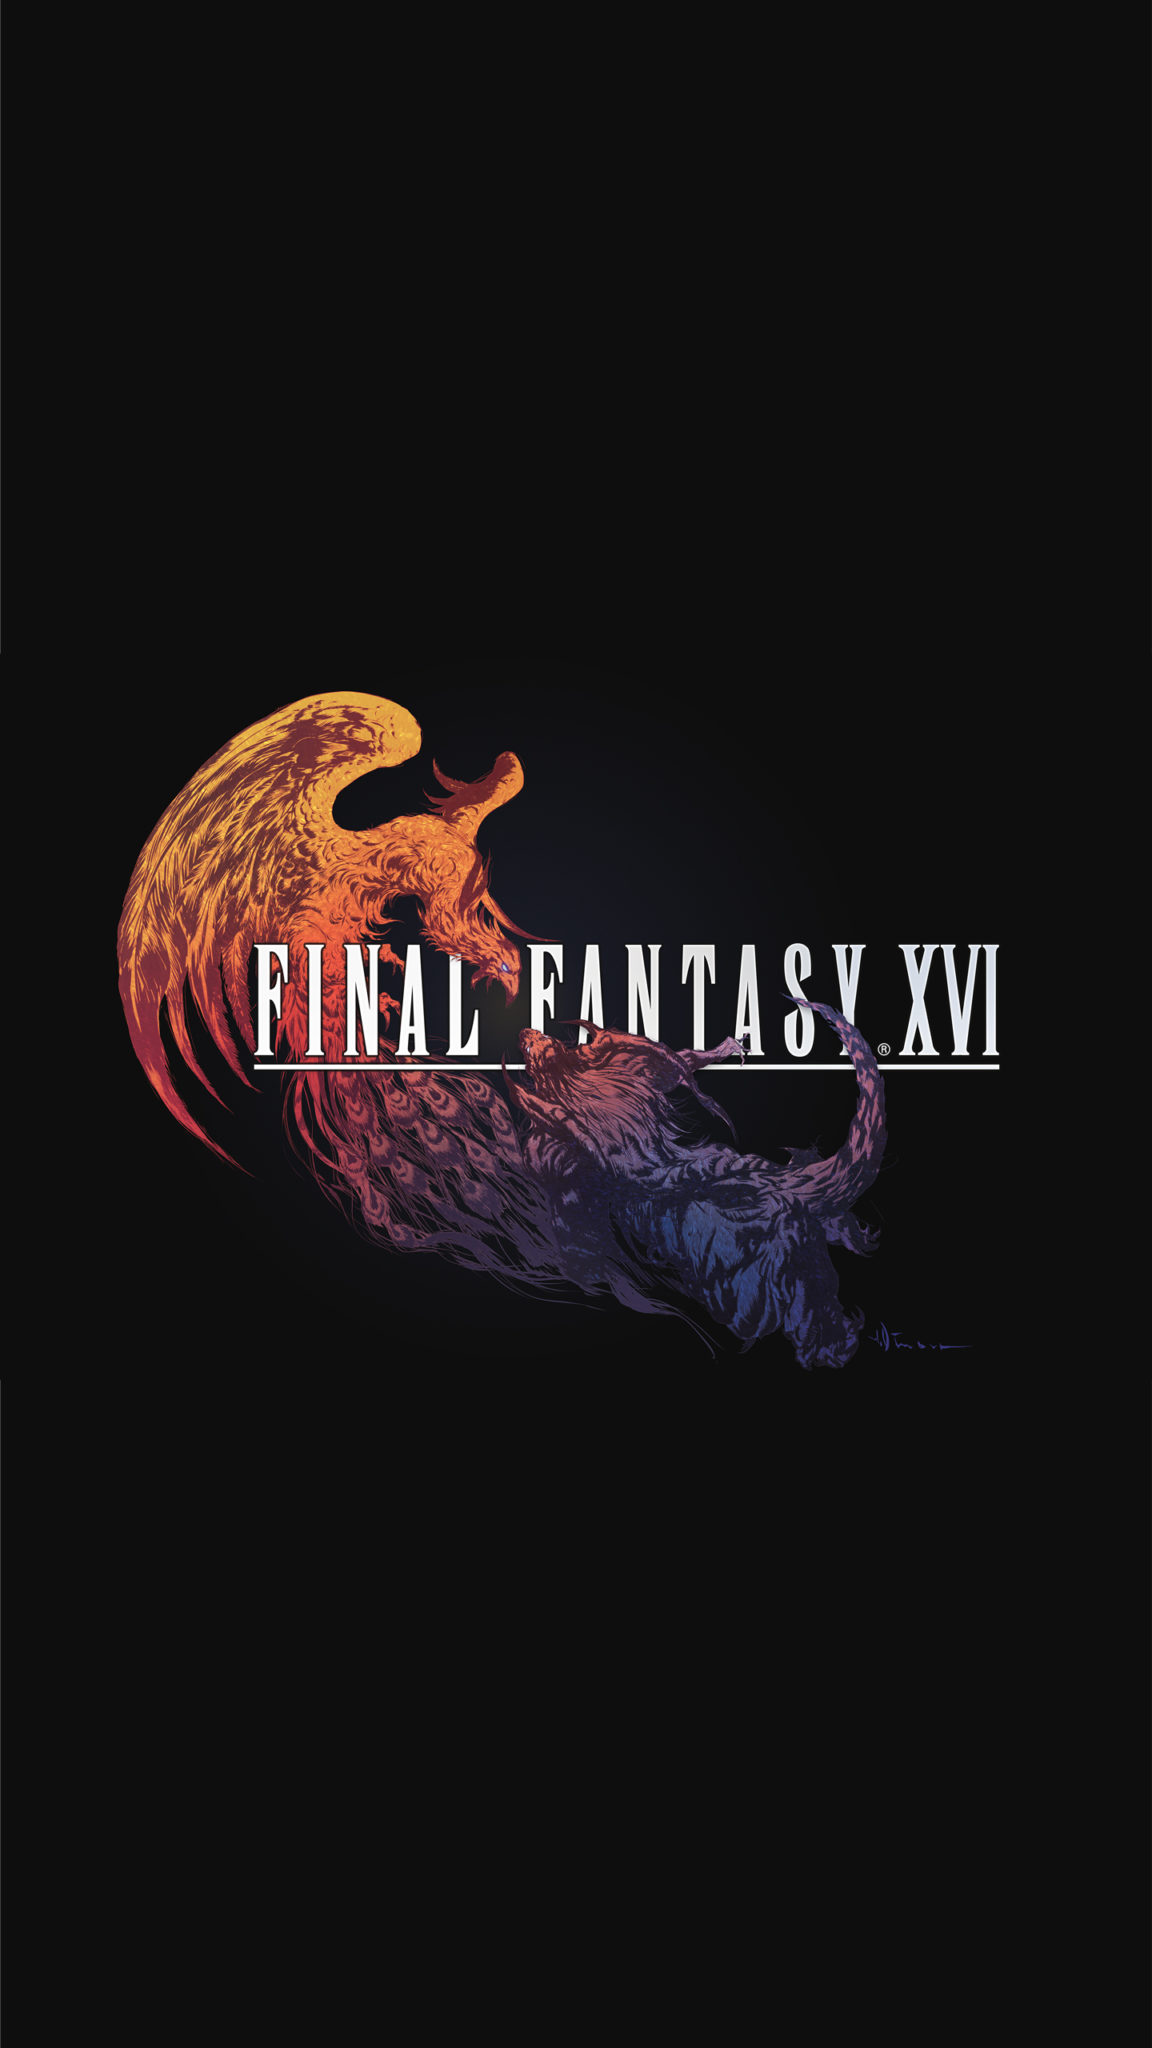 Ff16 Logo V2 1440x2560 Cat With Monocle